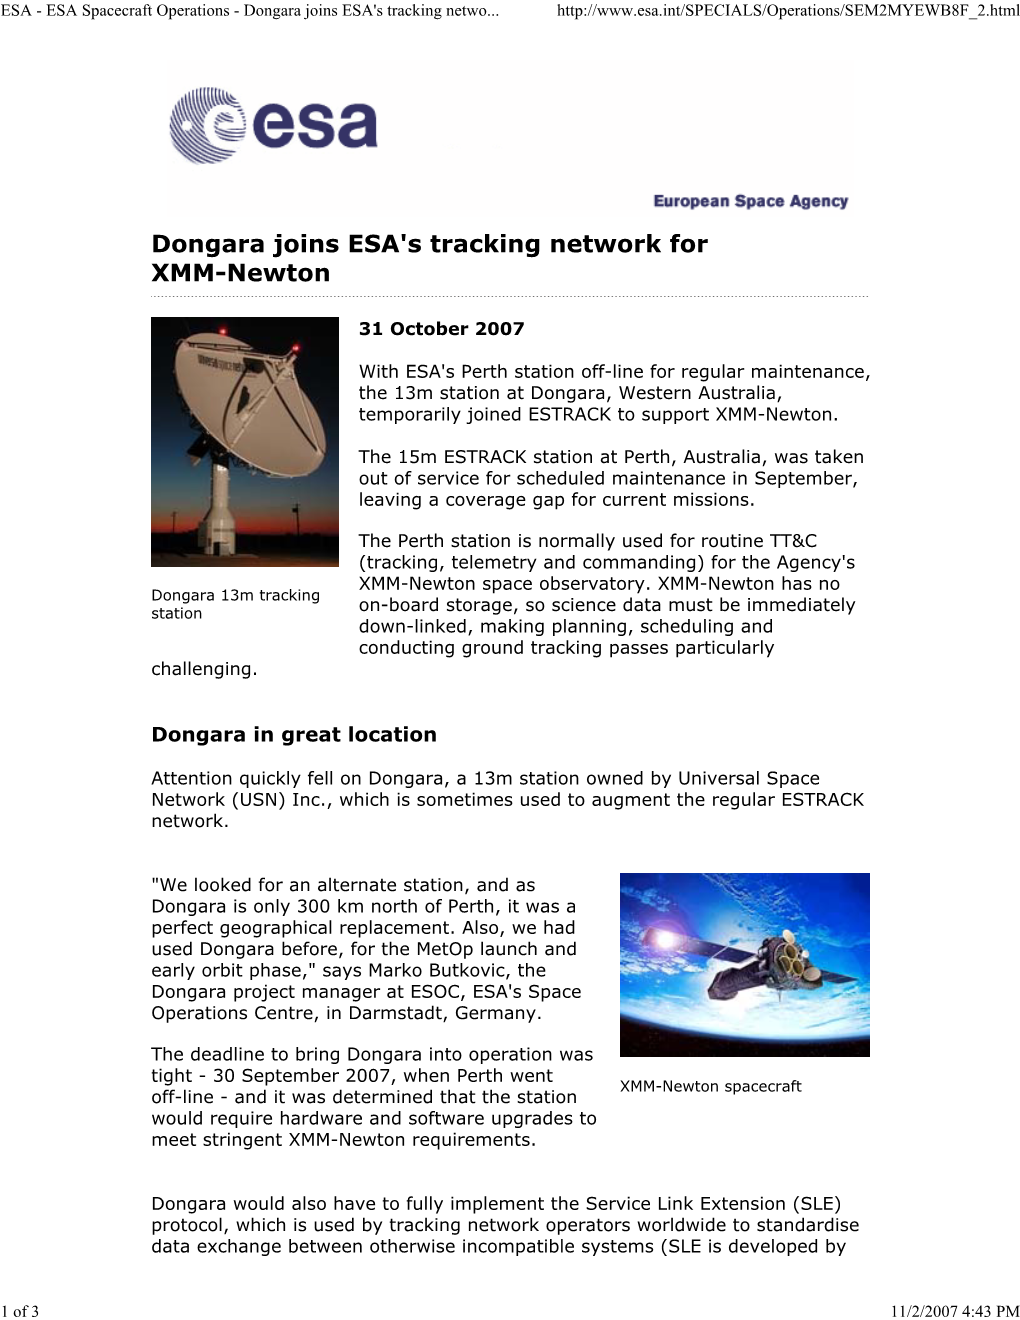 Dongara Joins ESA's Tracking Network for XMM-Newton